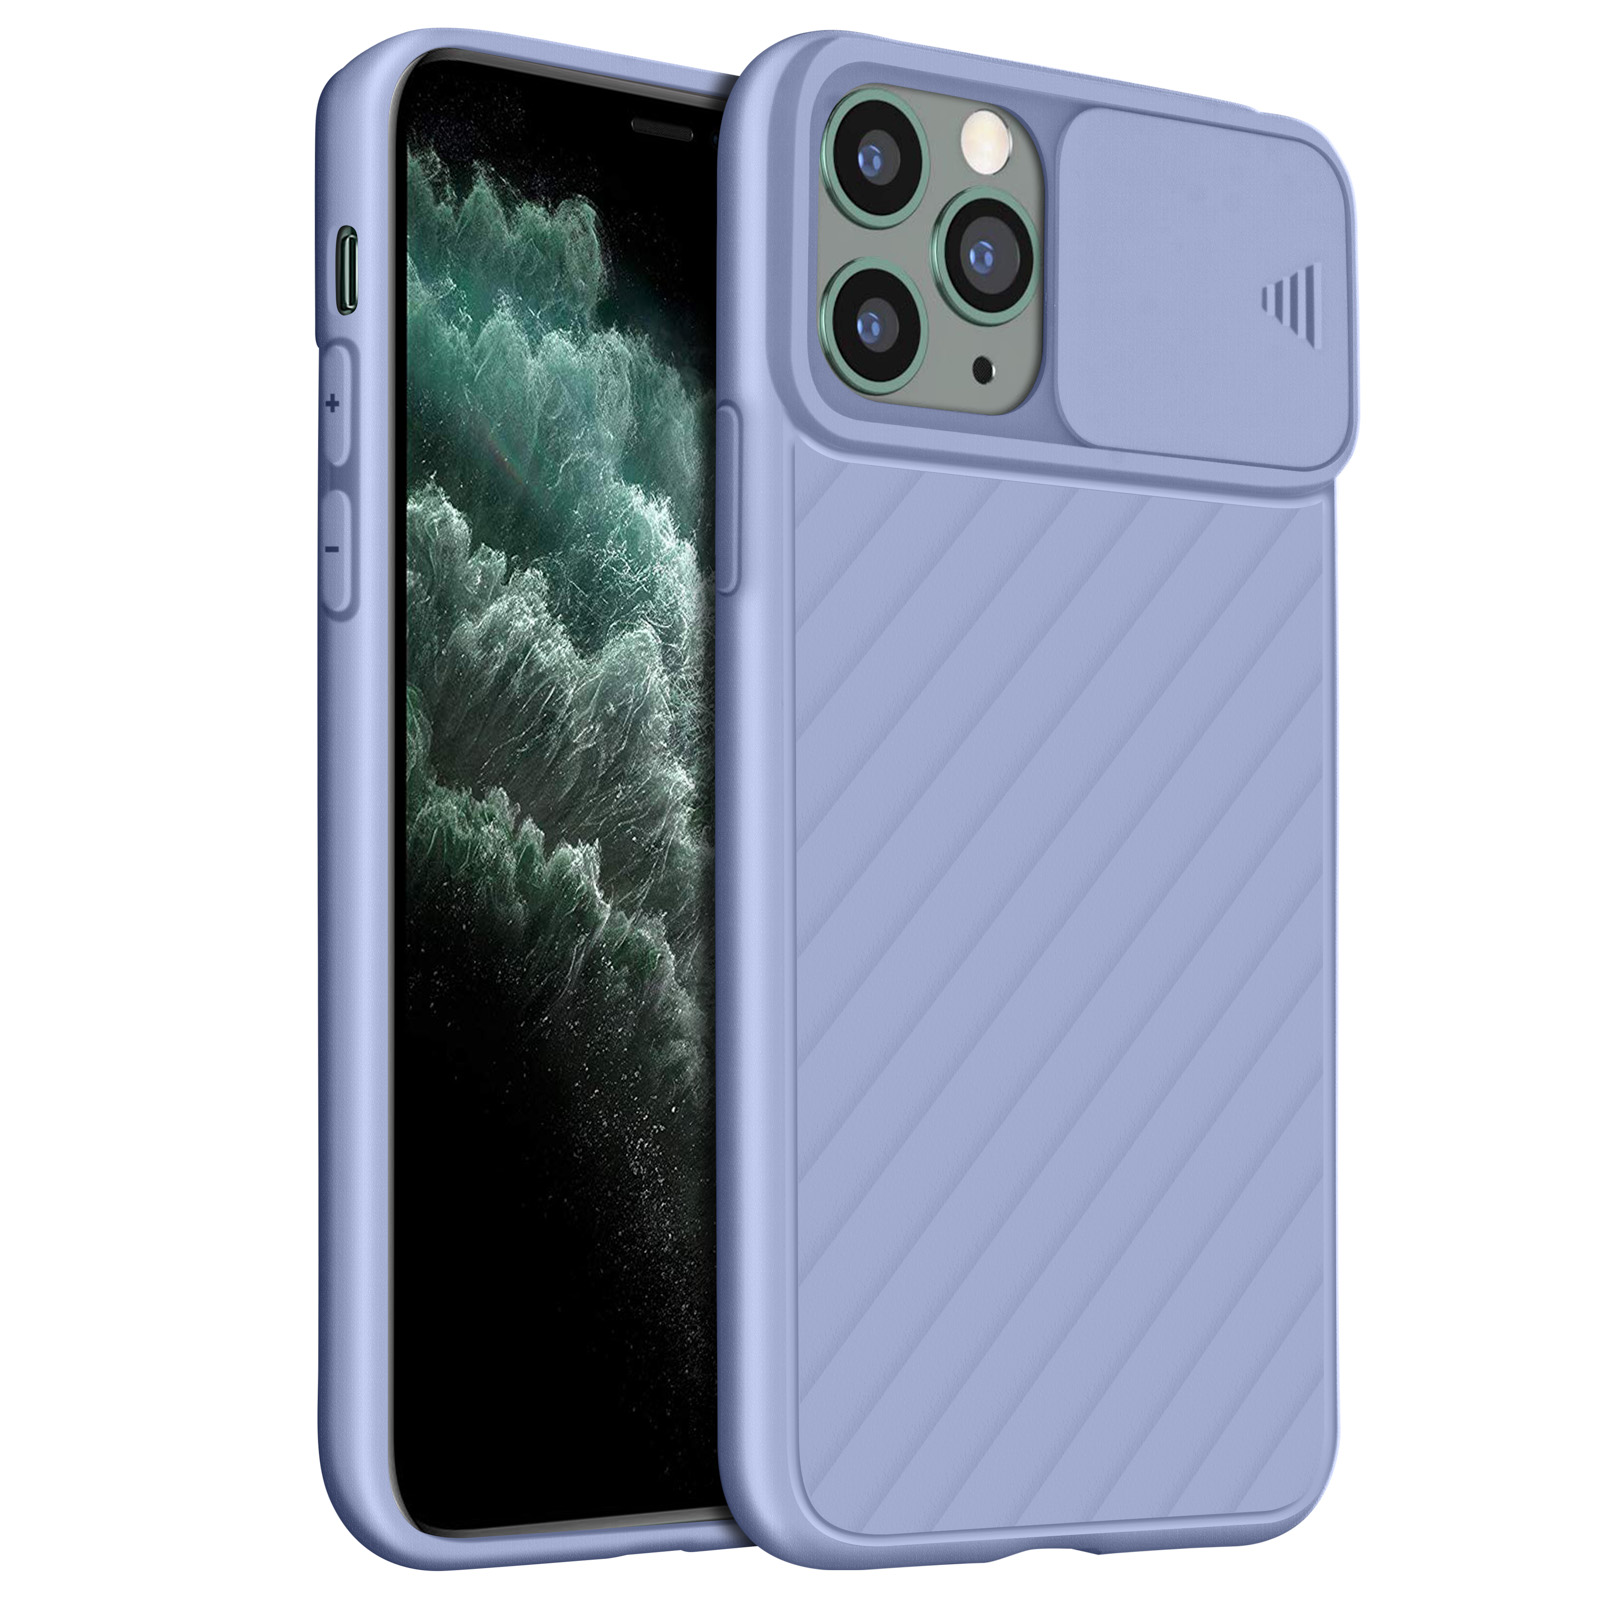 Coque iPhone 11 Pro Max - Apple silicone soft touch - Gris